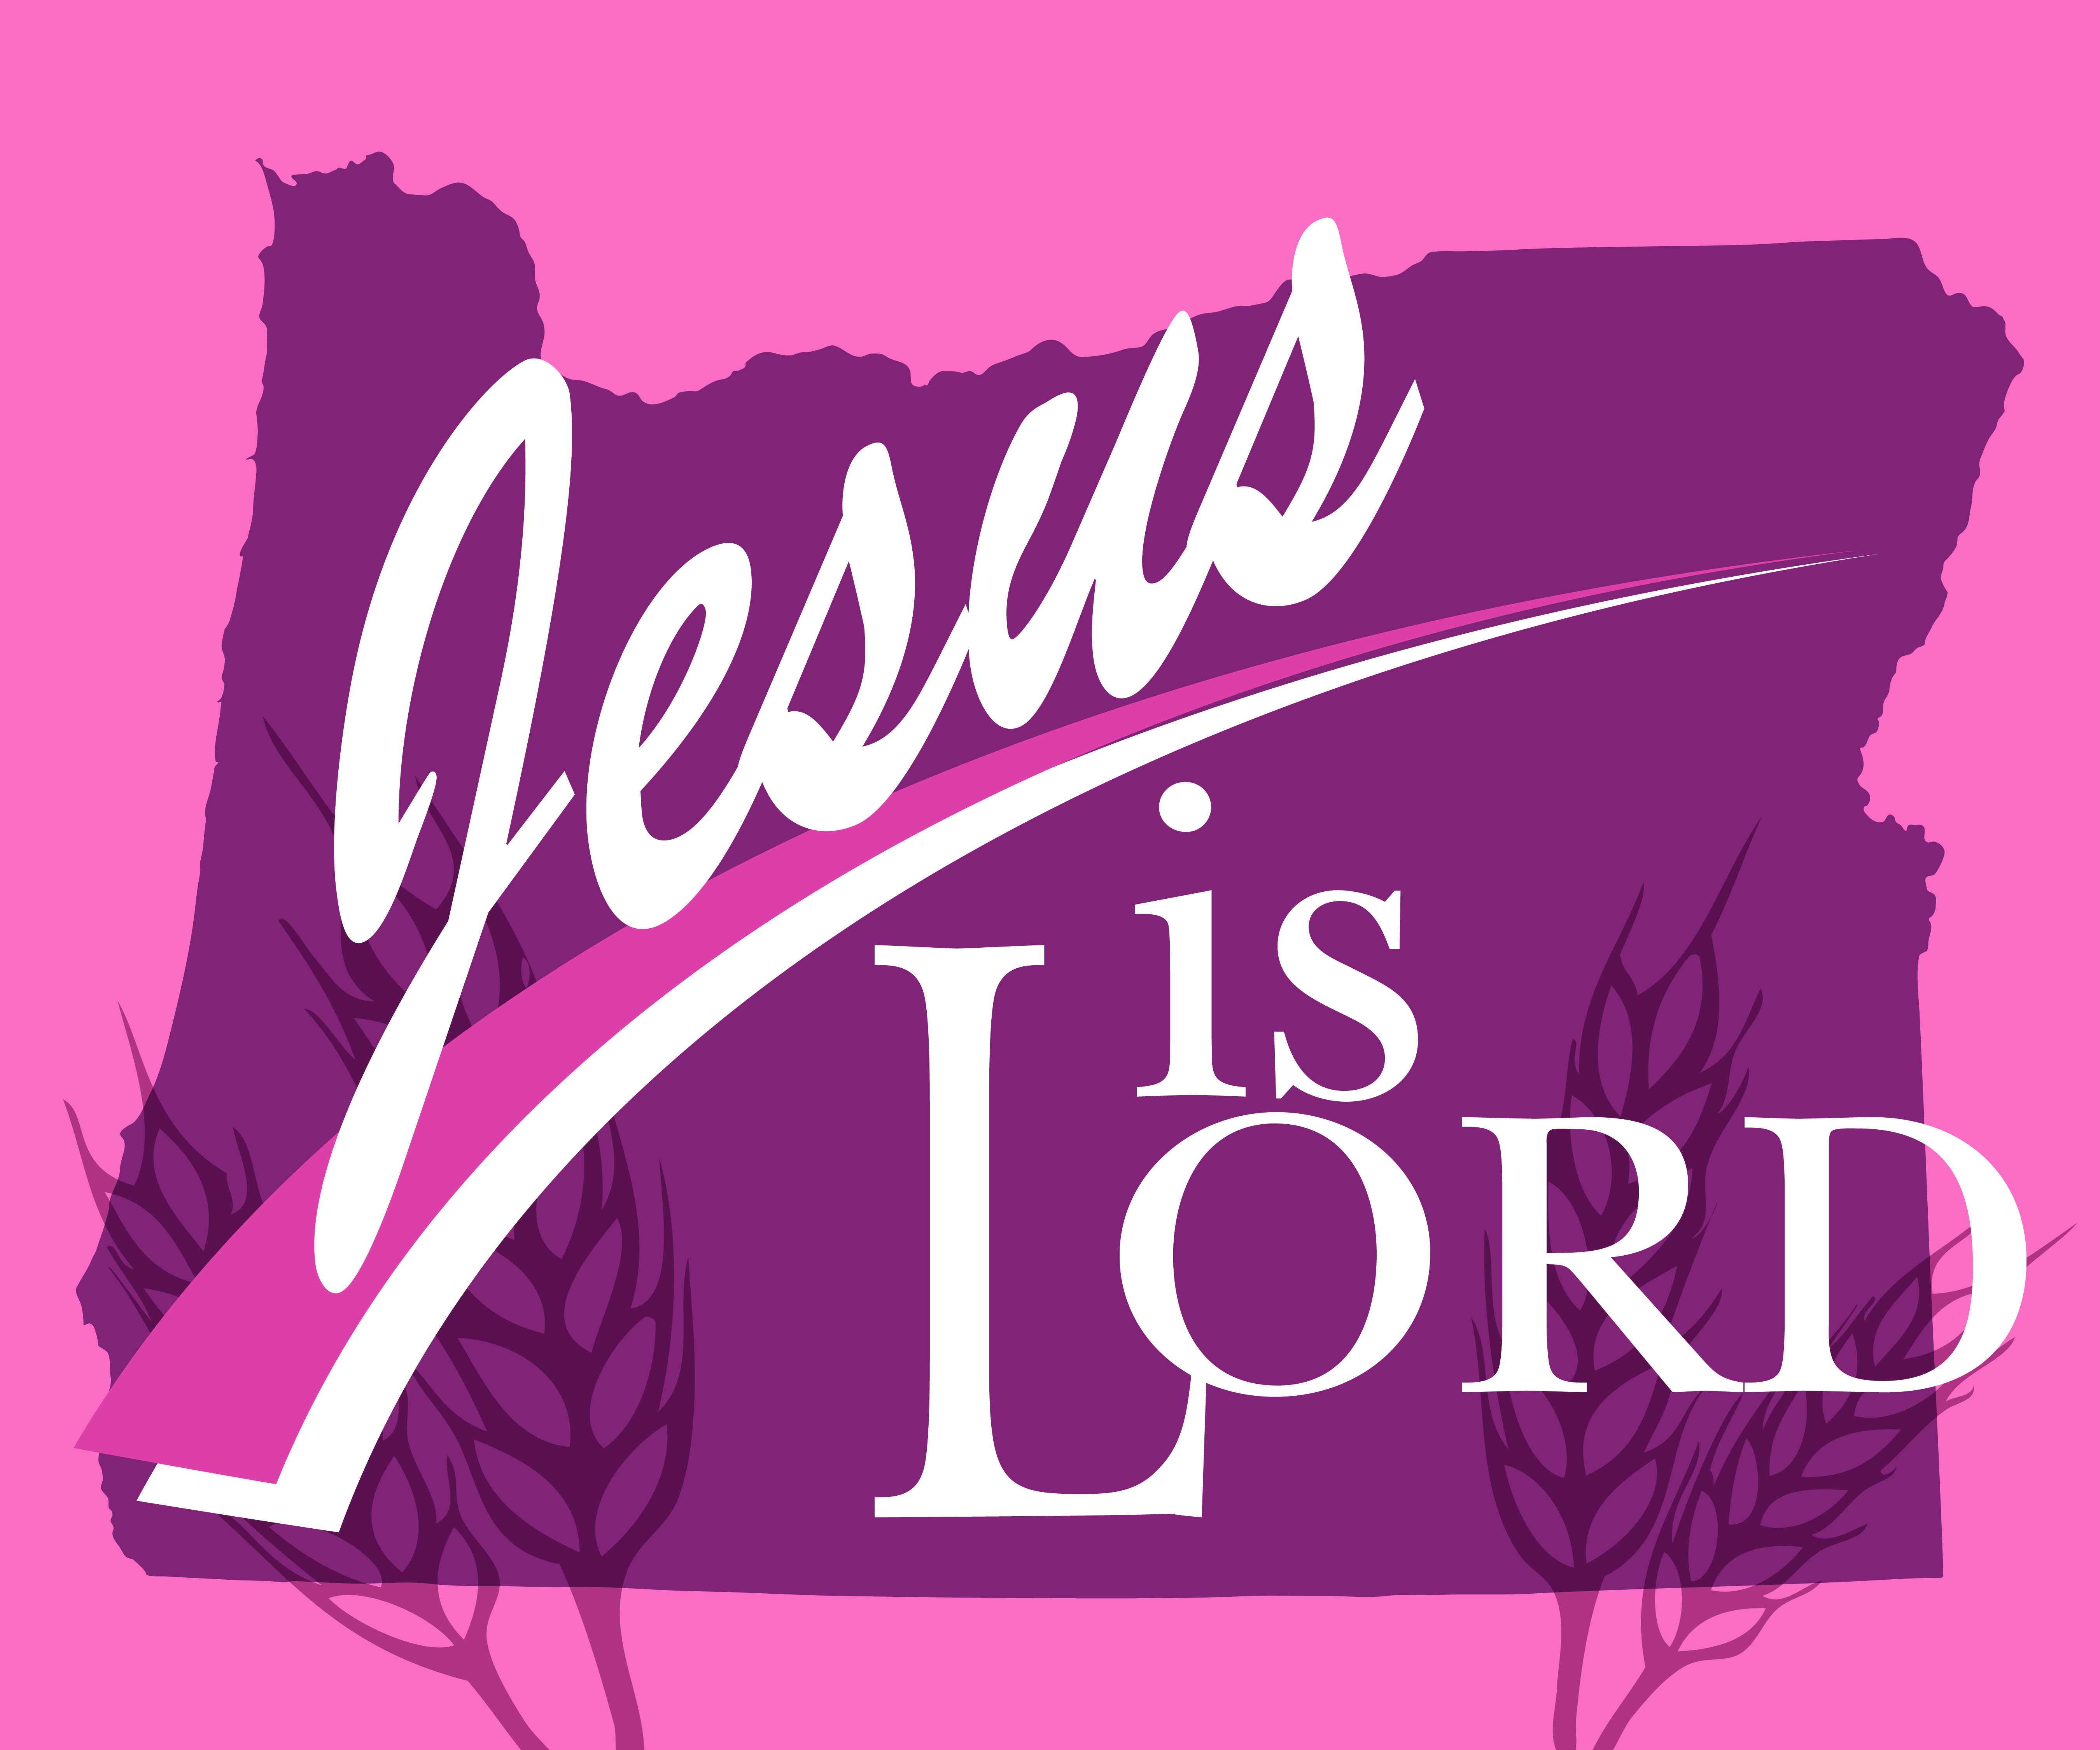 Jesus is Lord over Oregon!